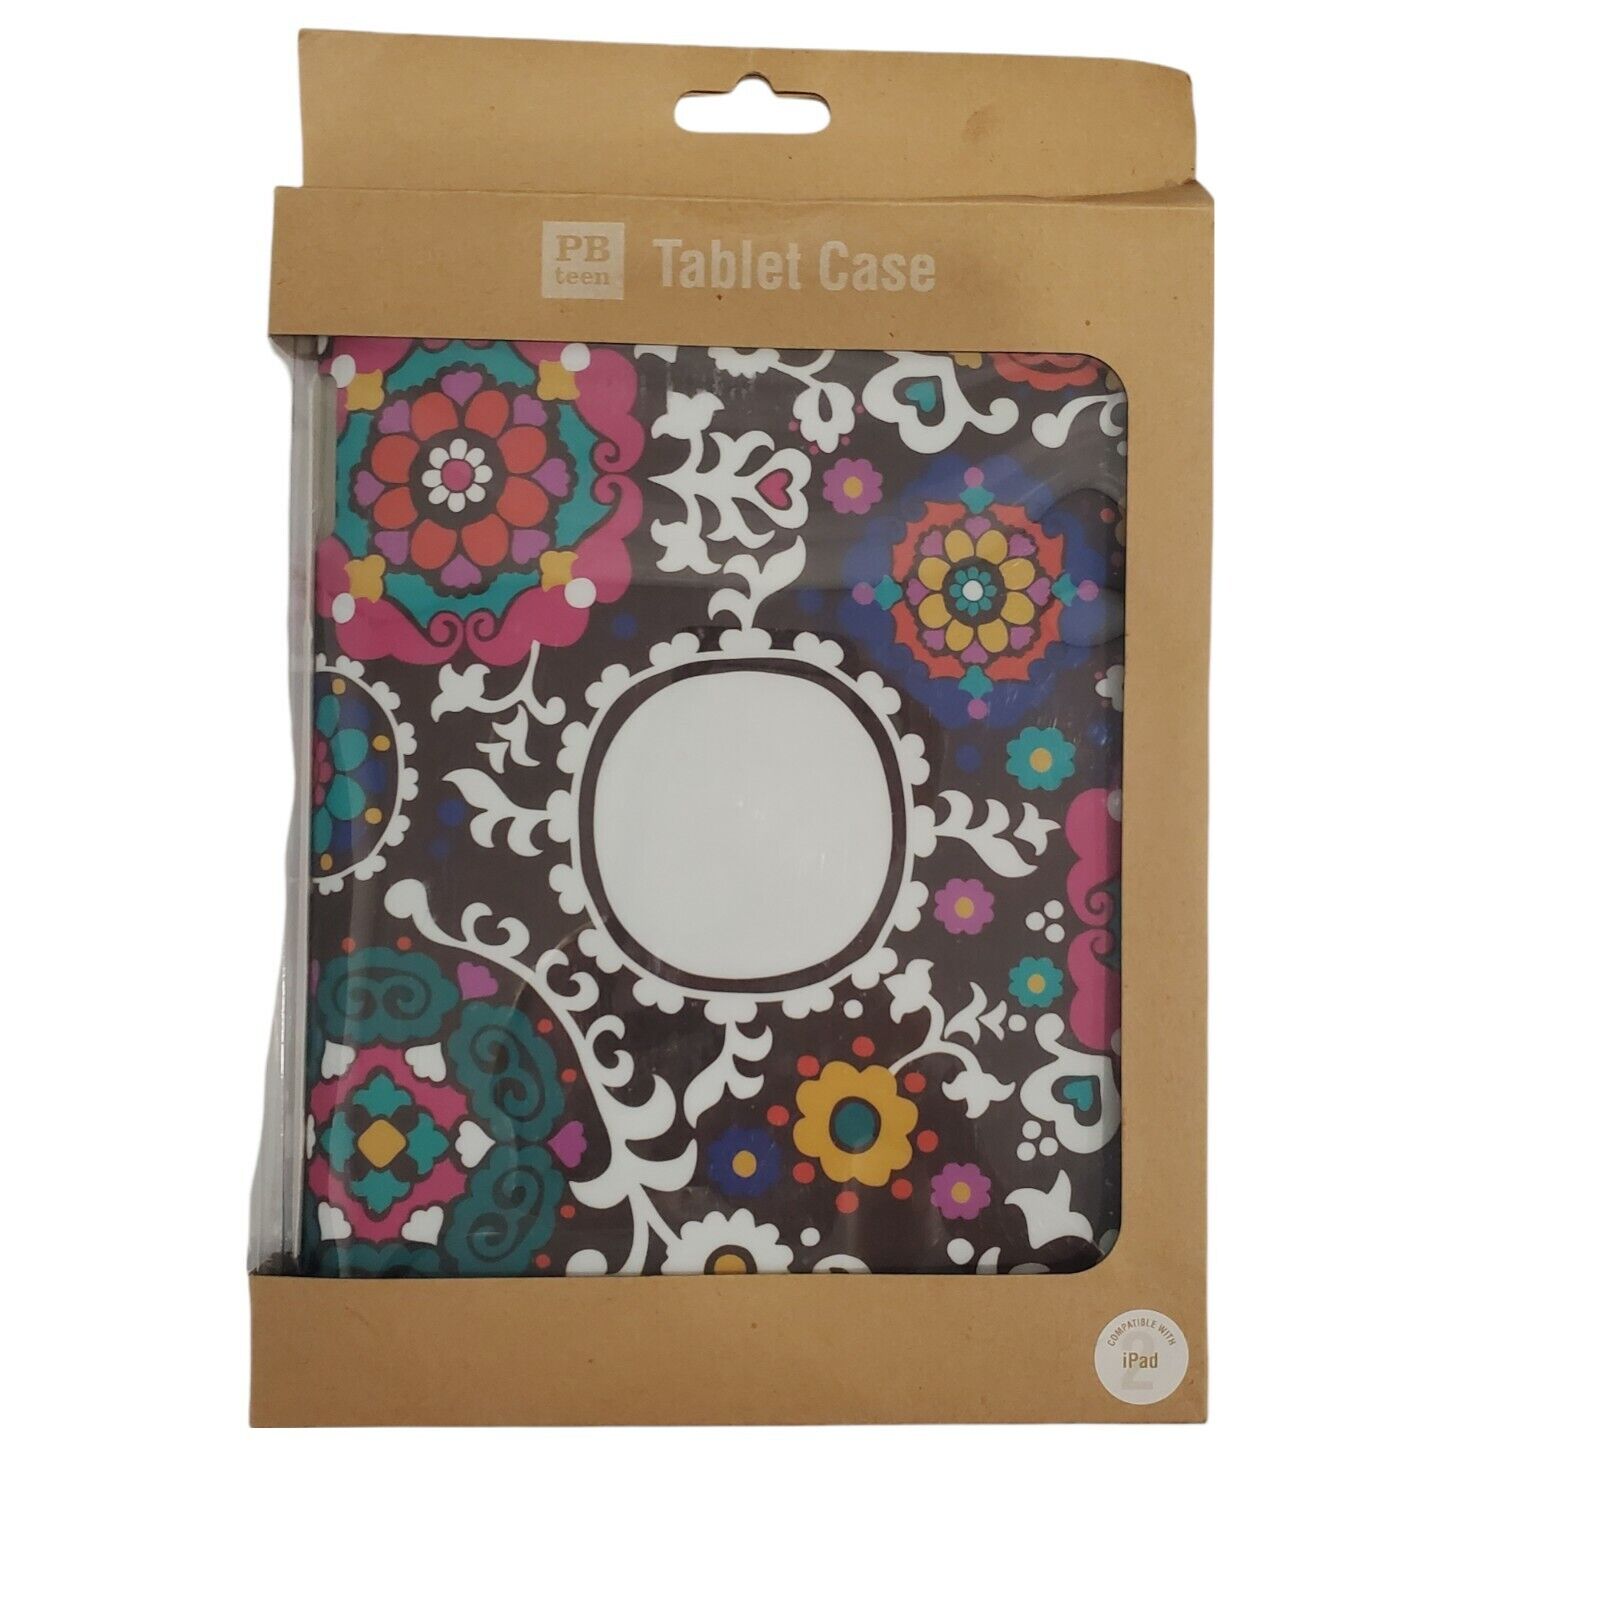 Pottery Barn PB Teen Tablet Case For IPAD 2 compatable New NIB Floral